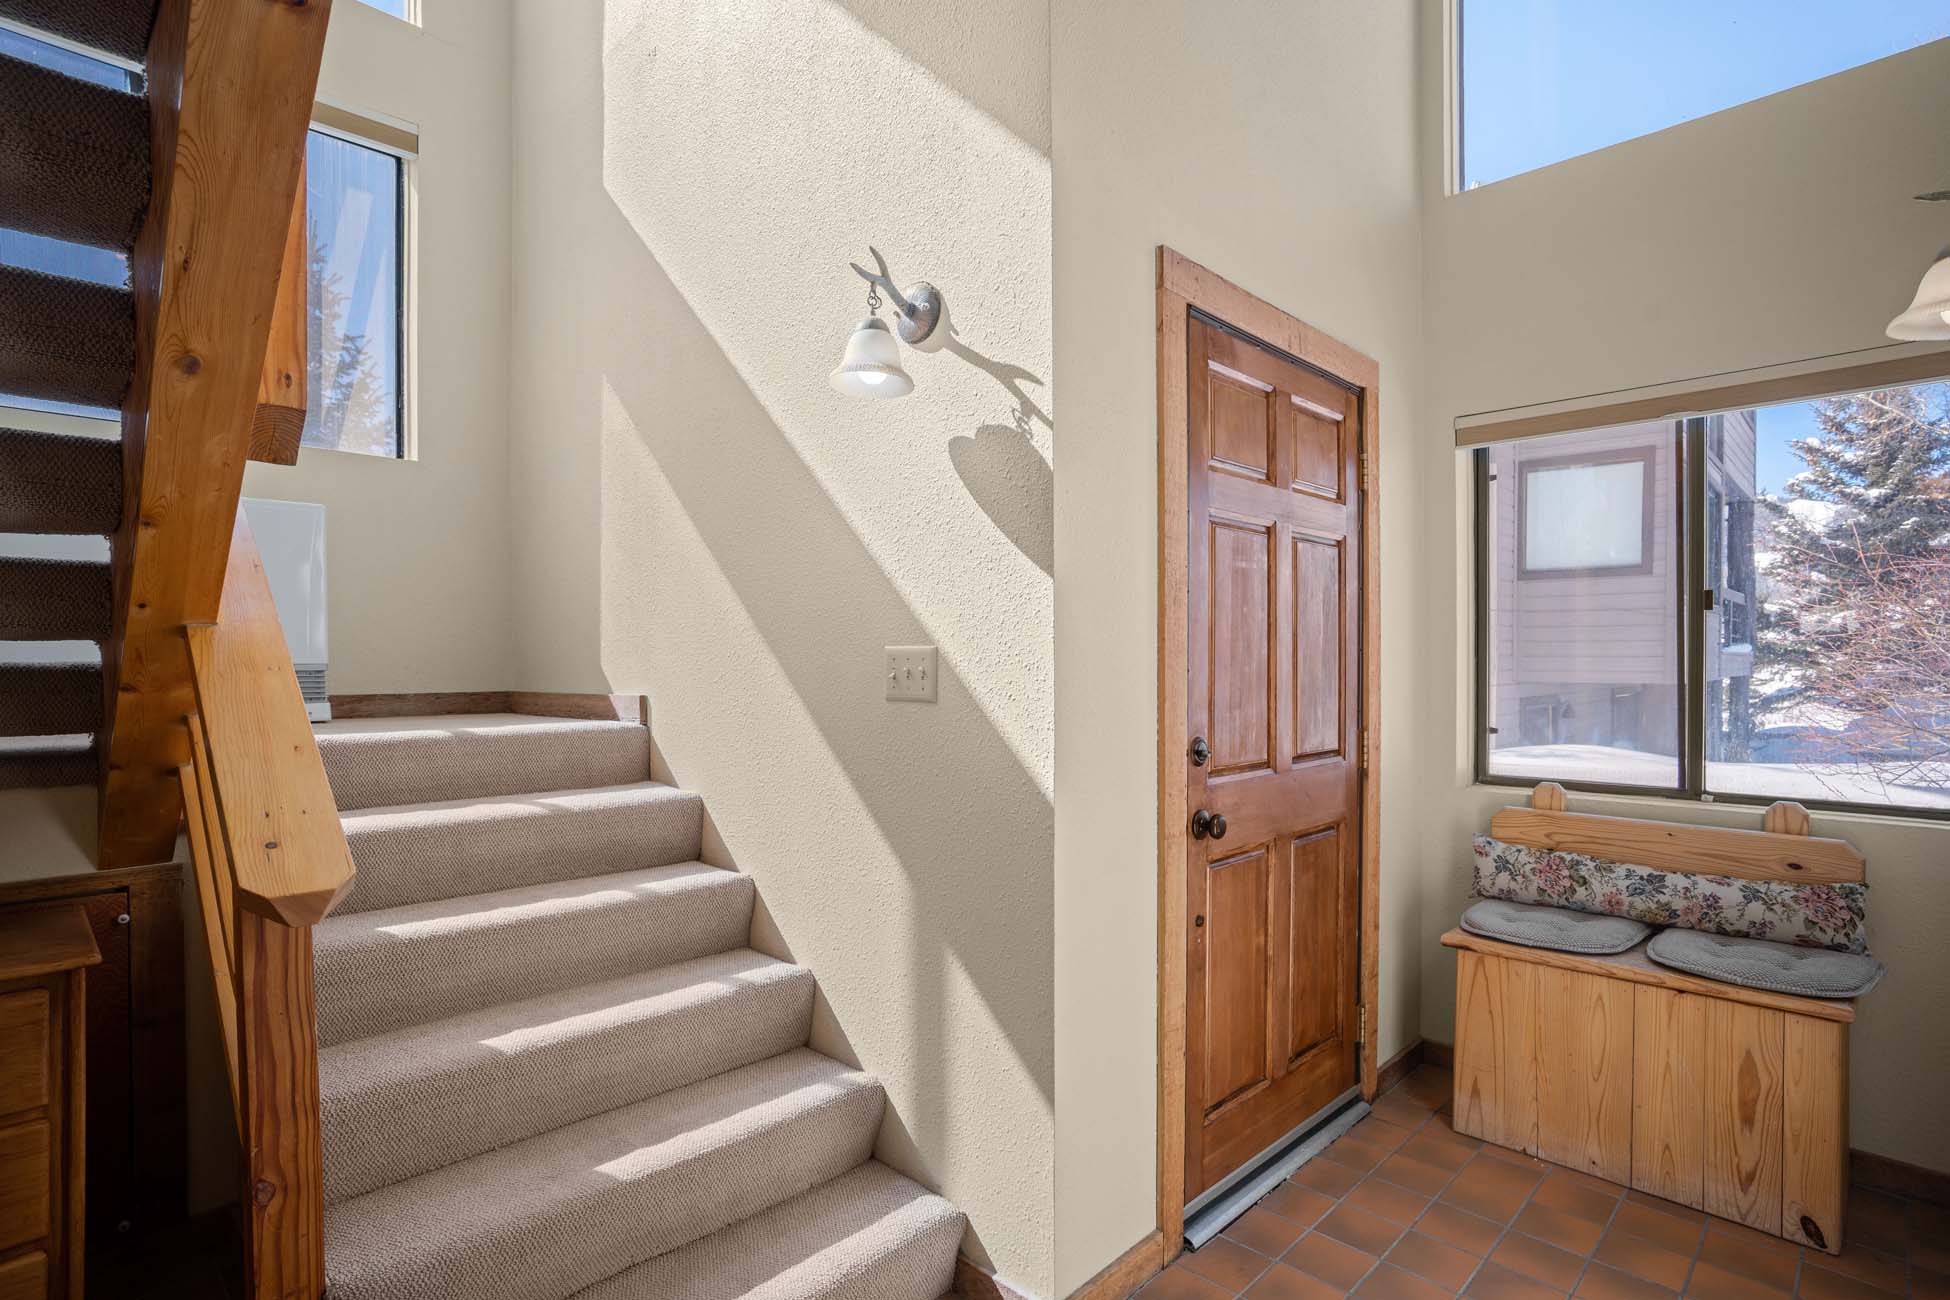 49 Powderview Drive, Crested Butte Colorado - stairs to loft